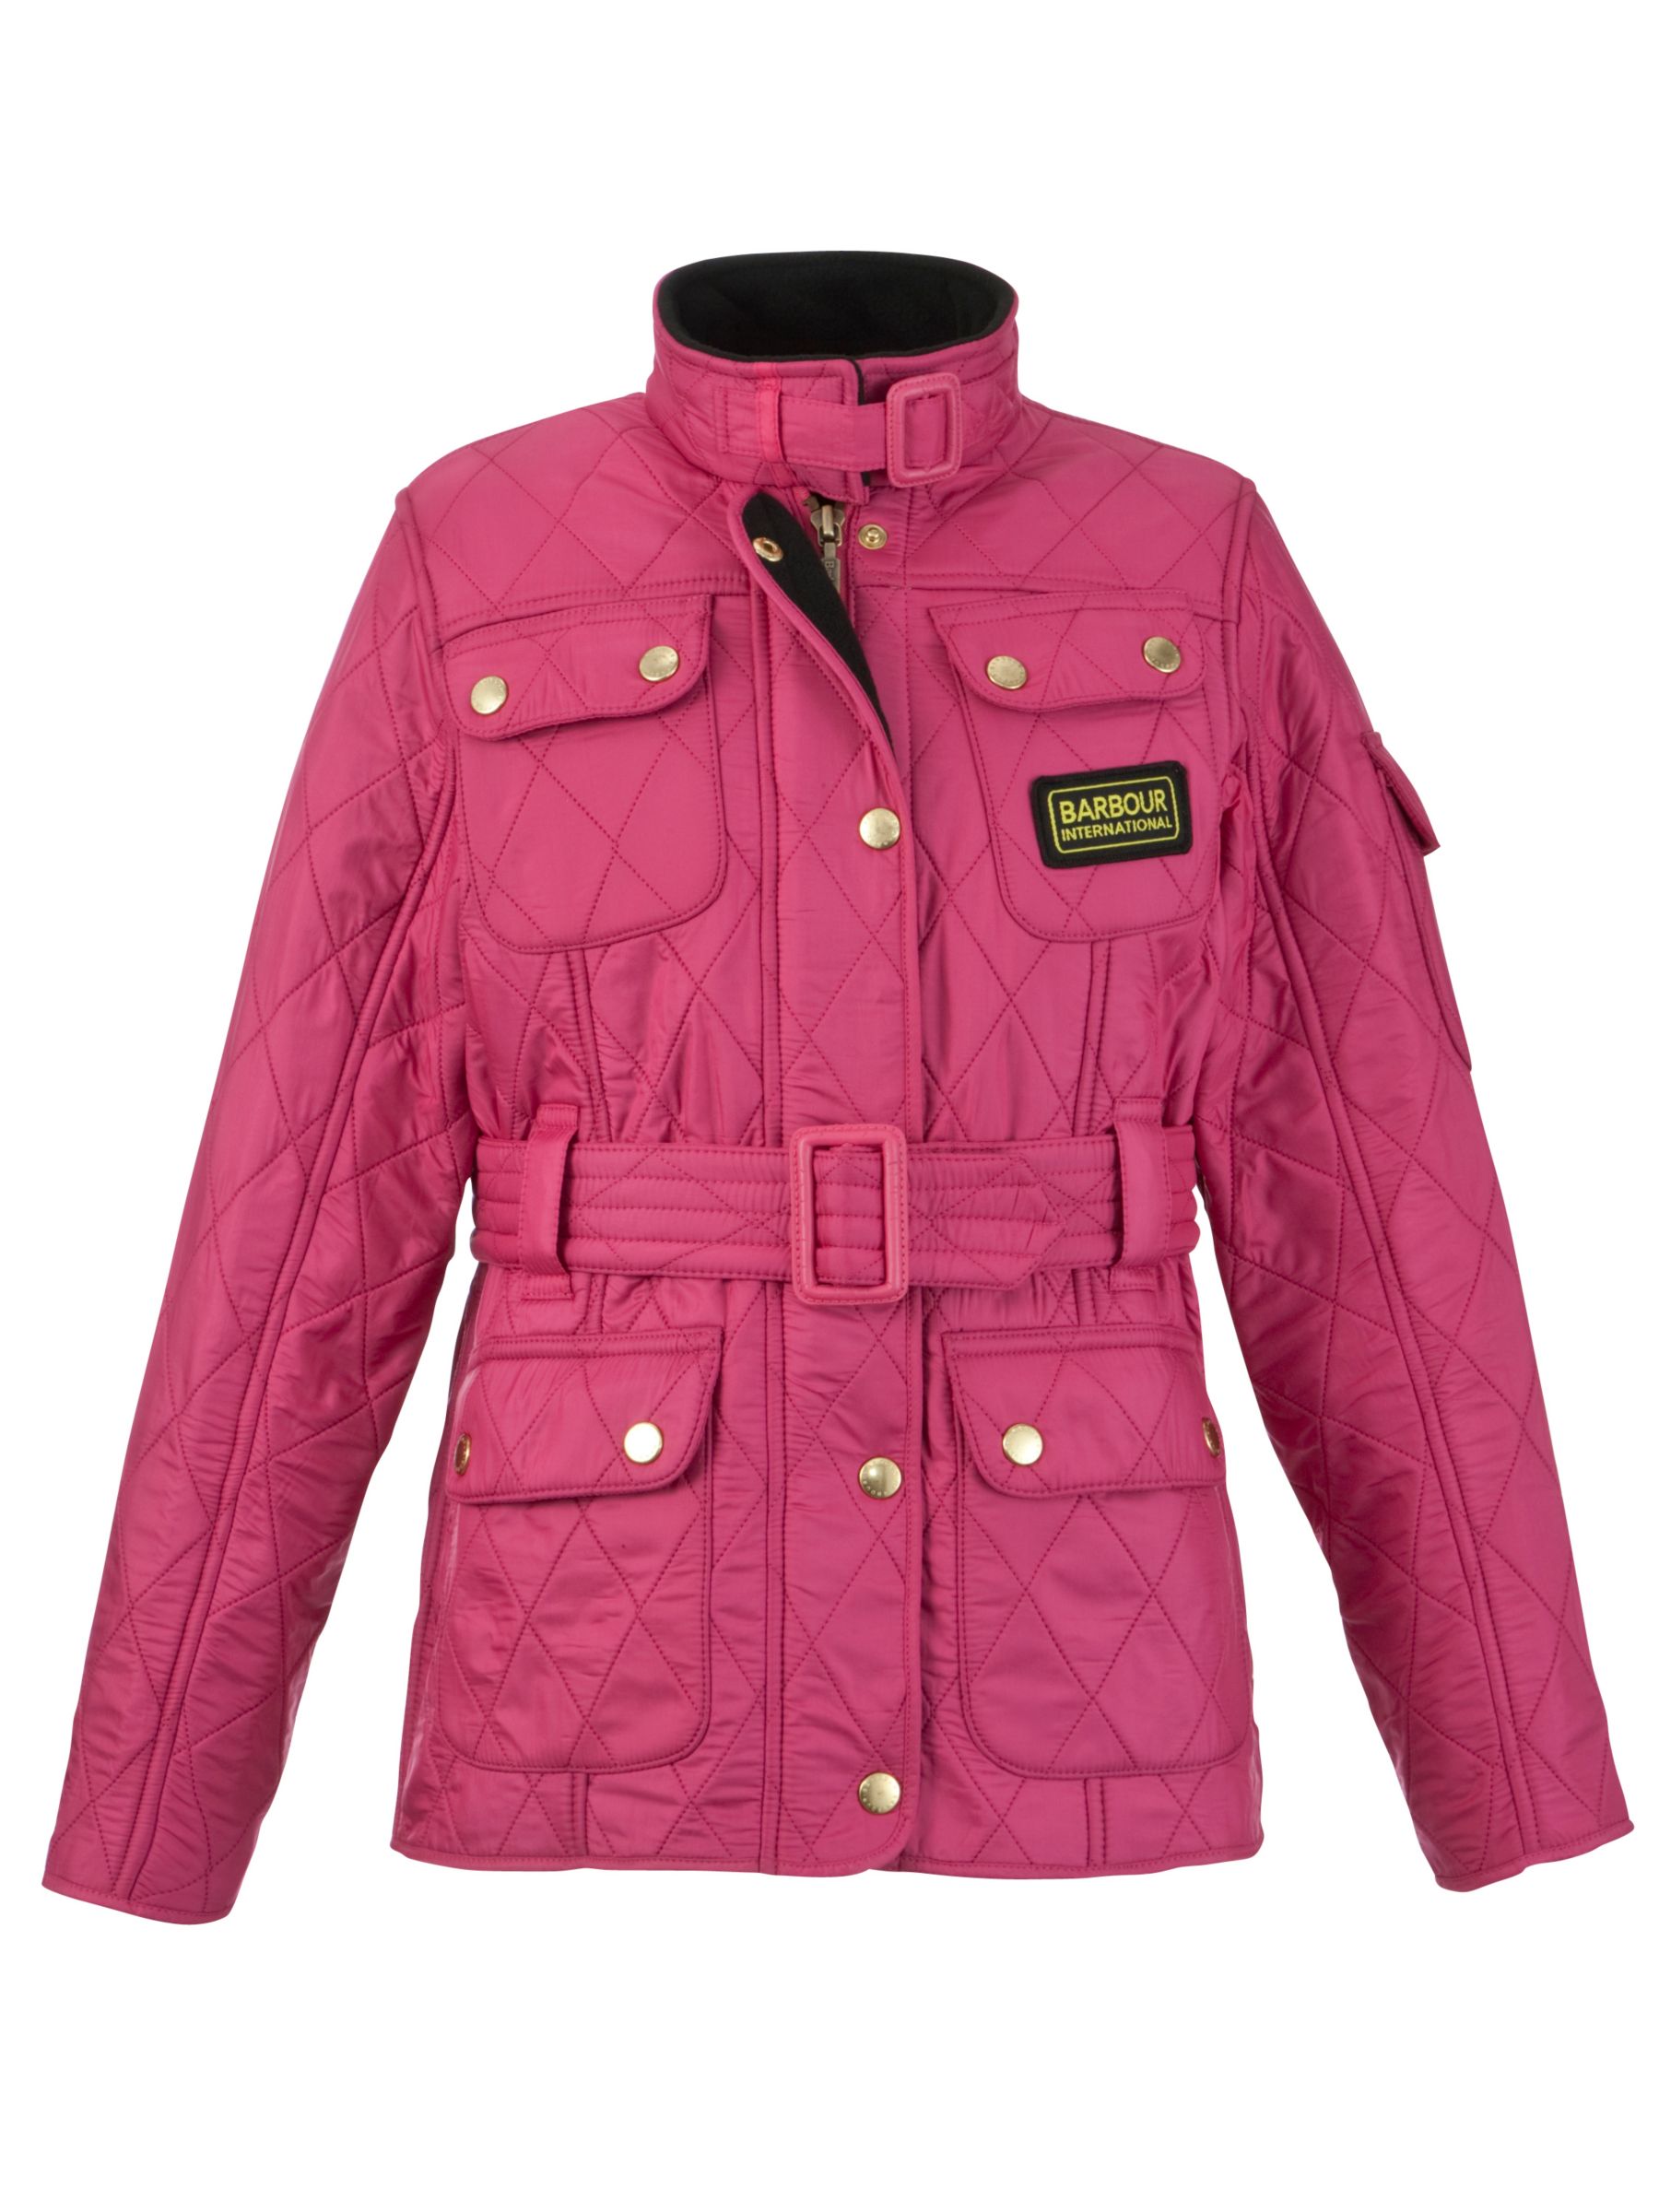 womens pink barbour jacket